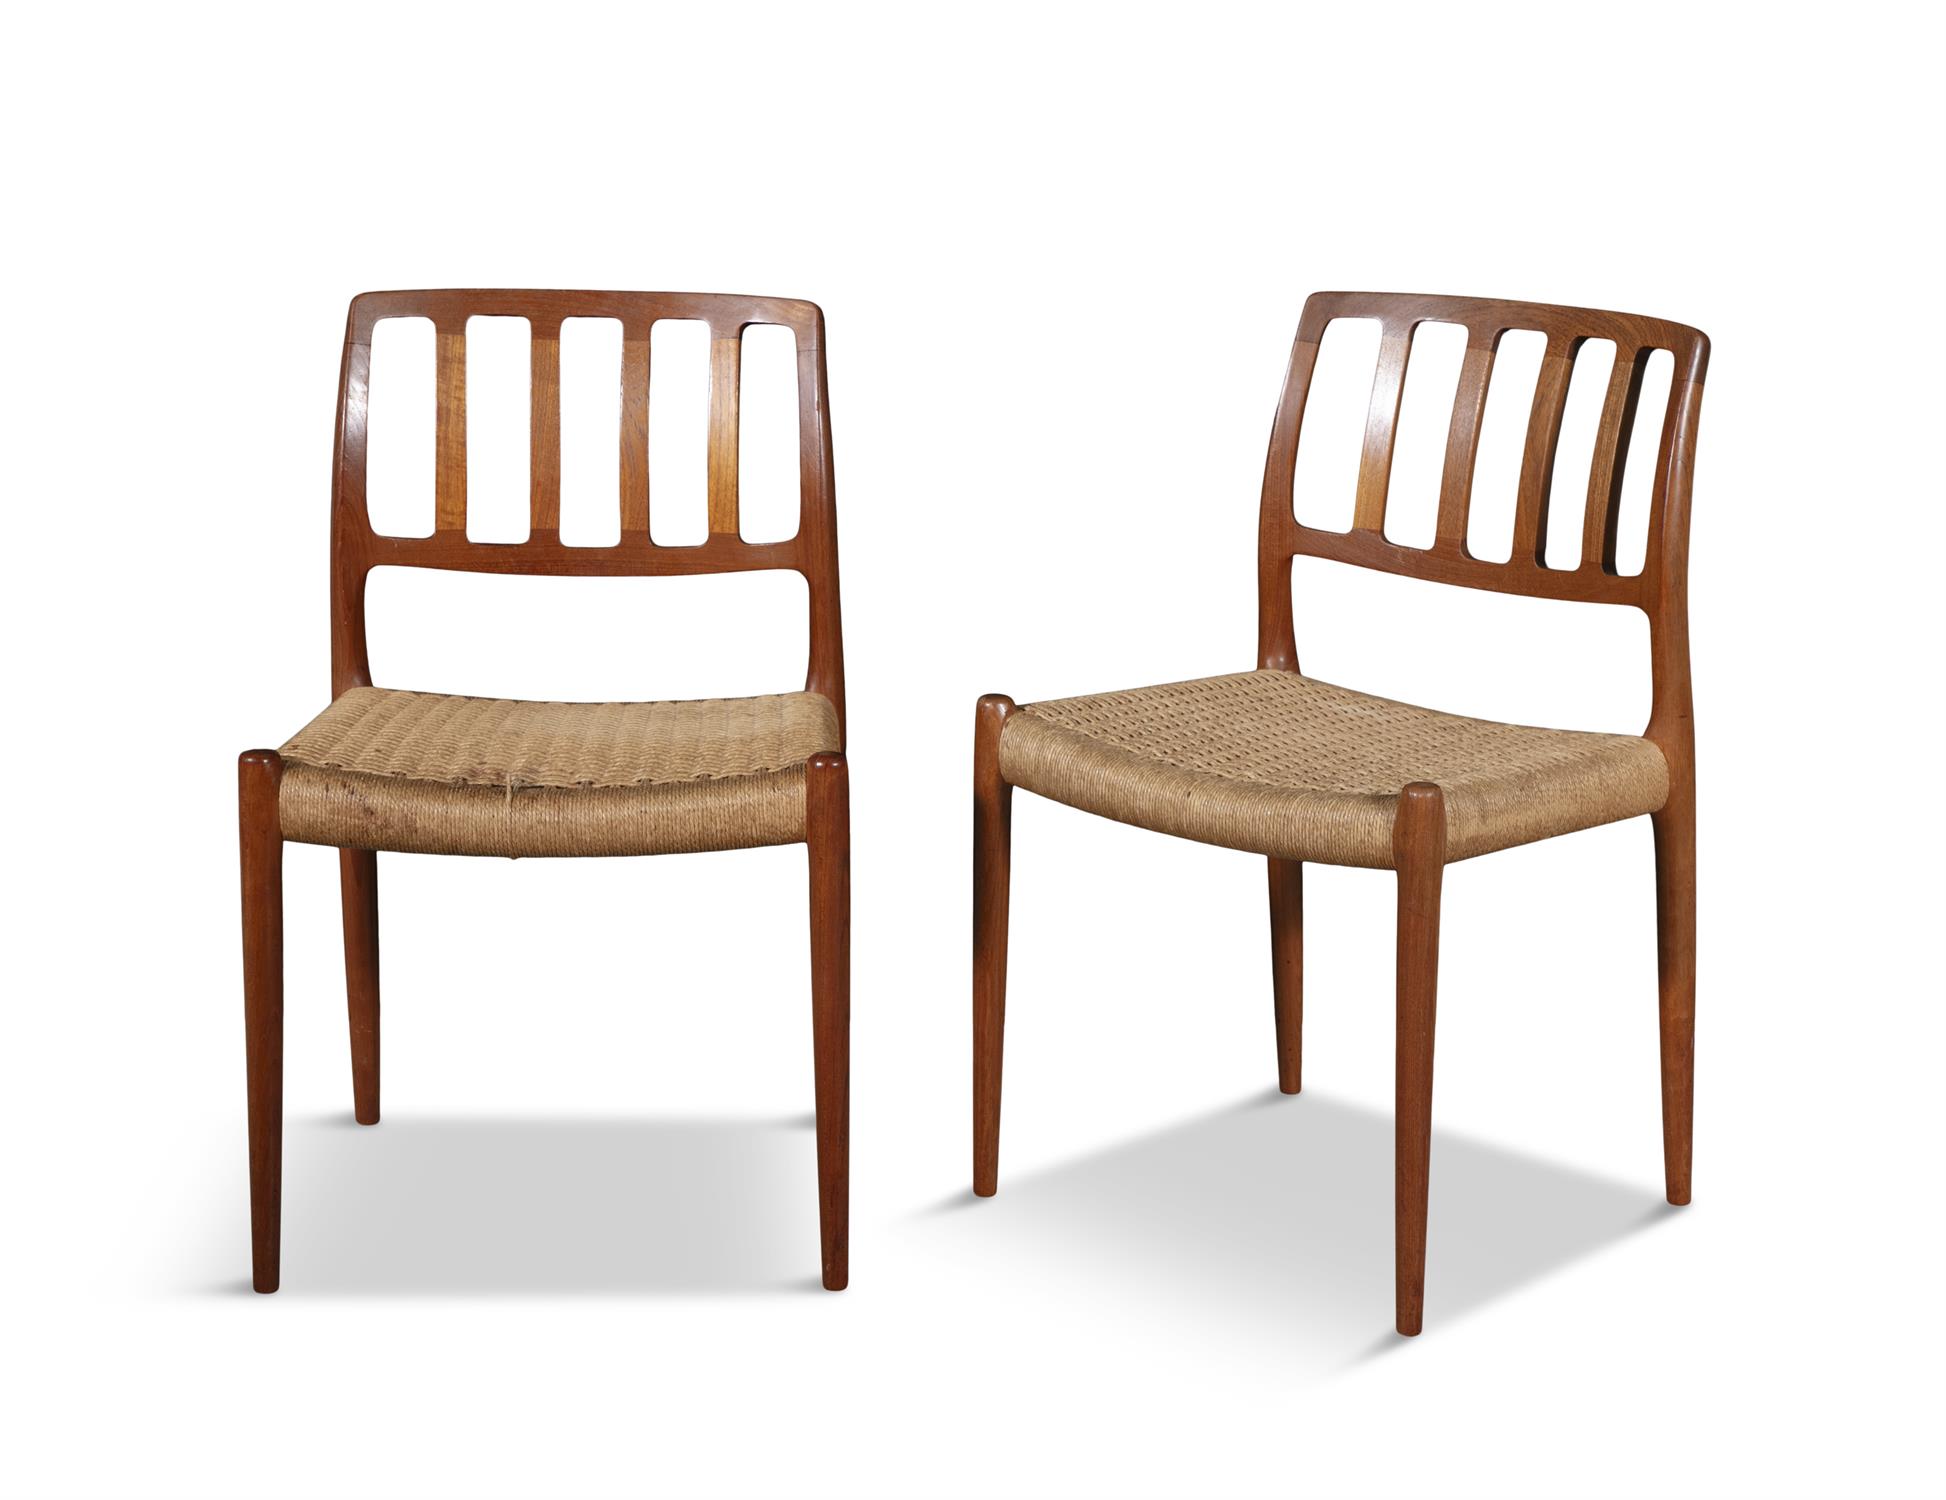 NEILS OTTO MØLLER (1920 - 1982) A set of six cane work dining chairs by Niels Otto Møller. - Image 4 of 5